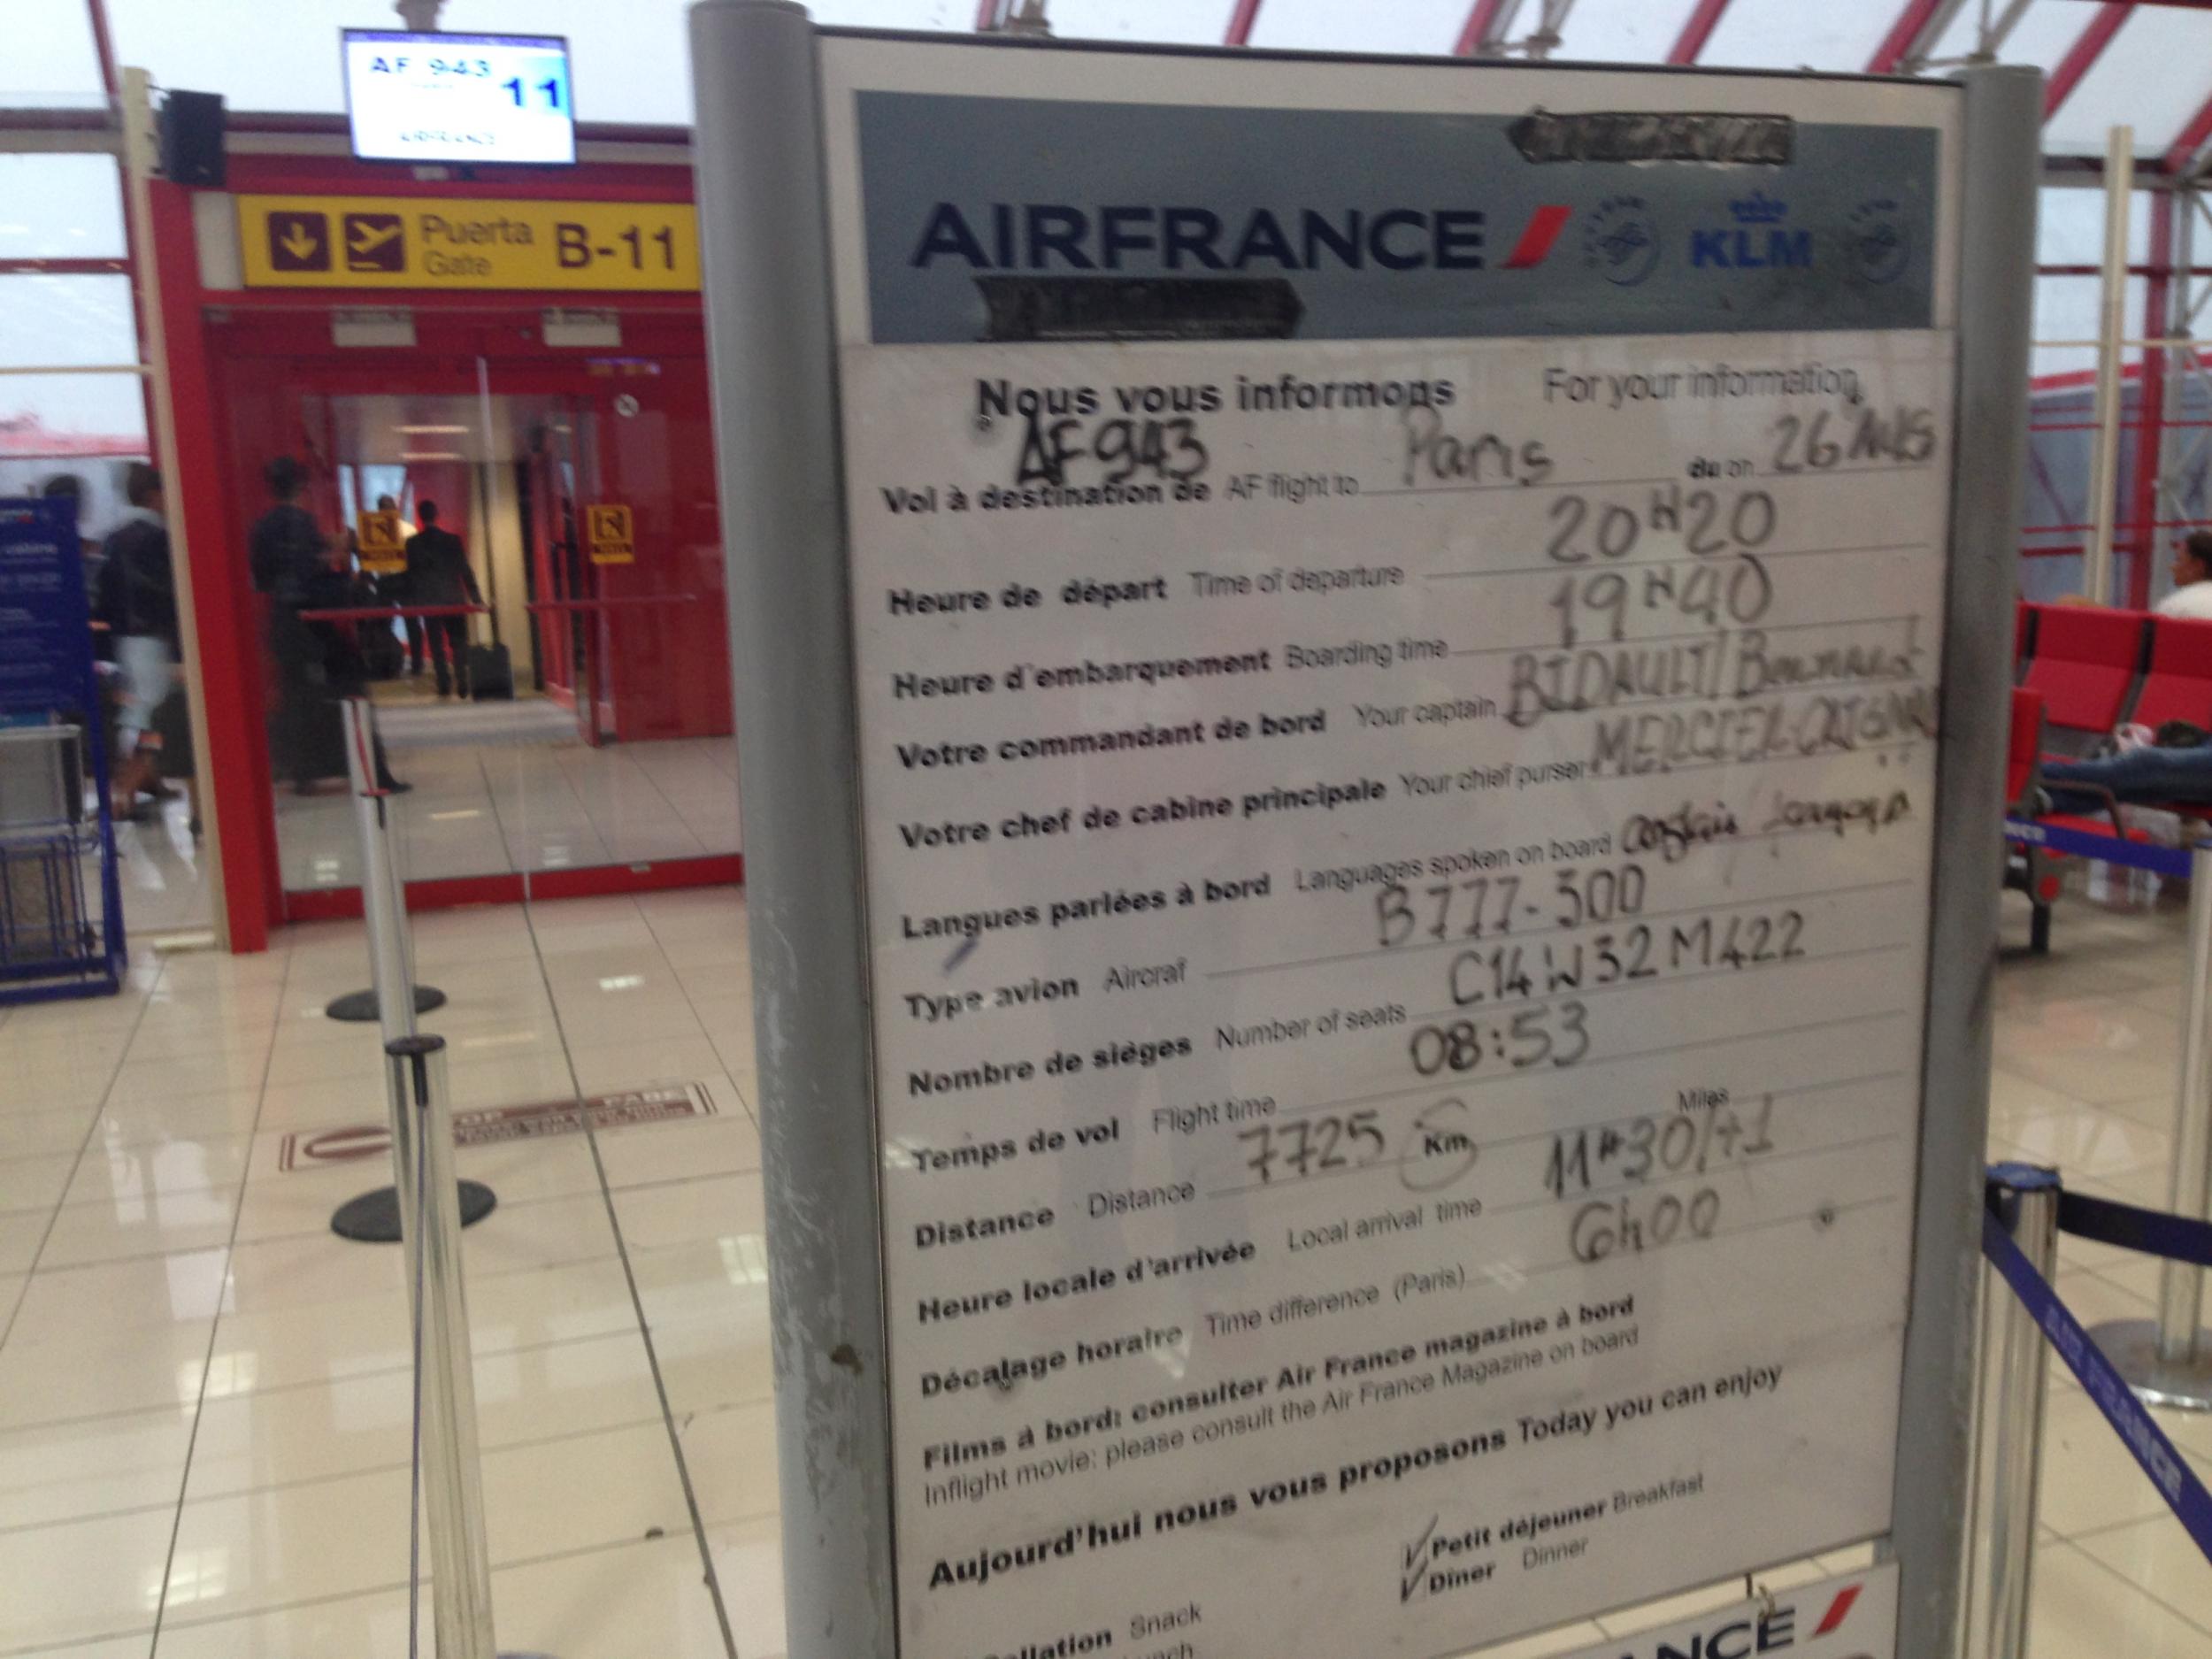 Packing them in: check-in notice for Air France flight to Paris at Havana airport, showing a full load of 468 passengers